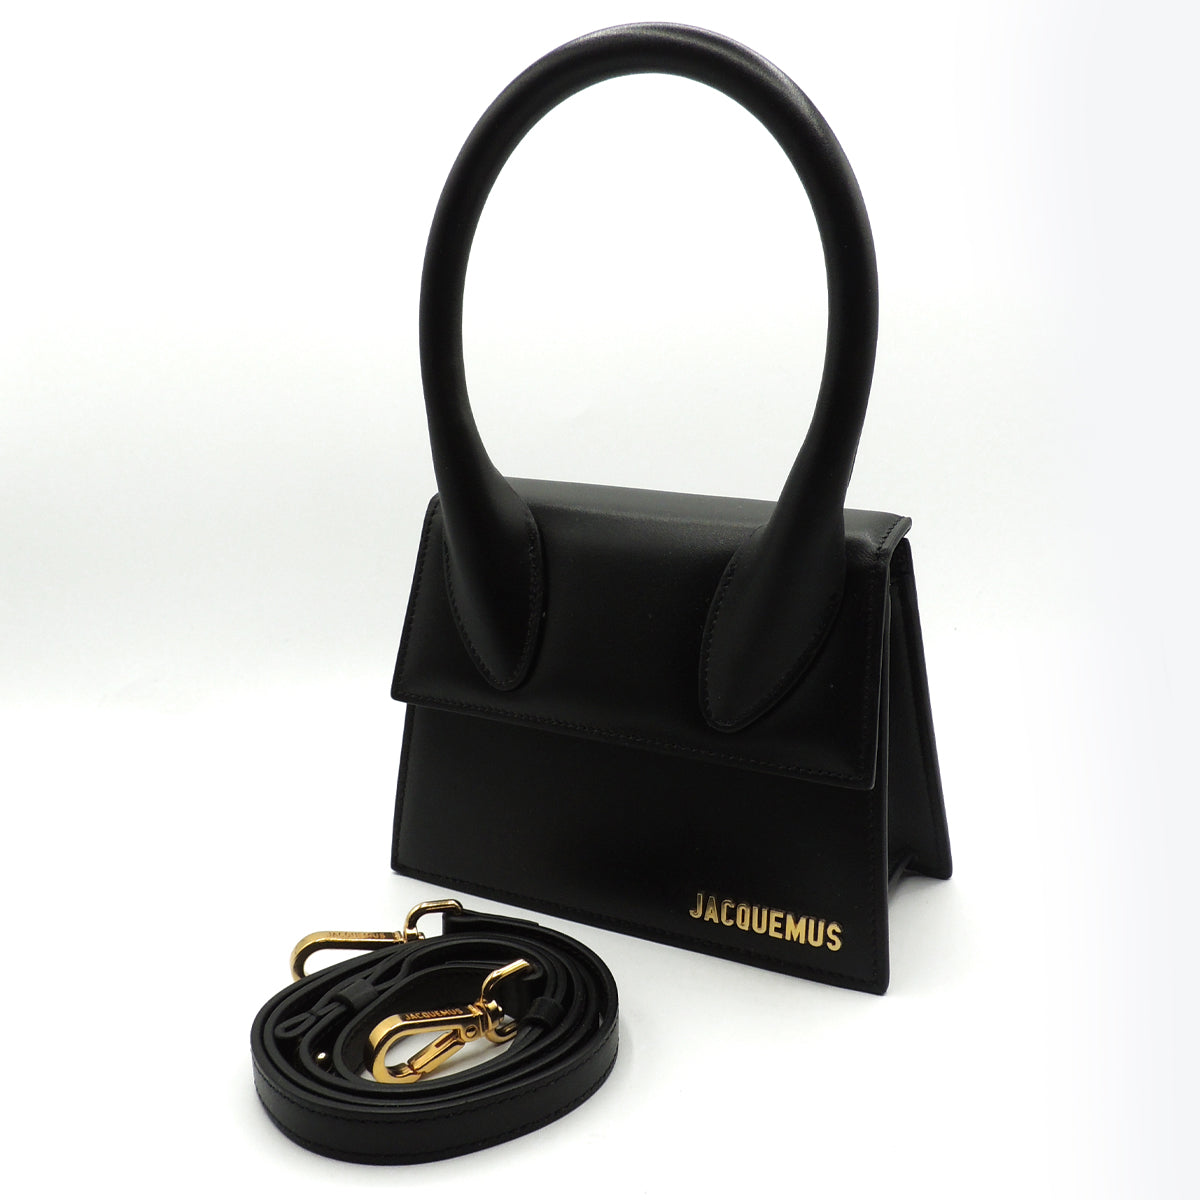 Jacquemus Le Chiquito Moyen leather top-handle bag in black